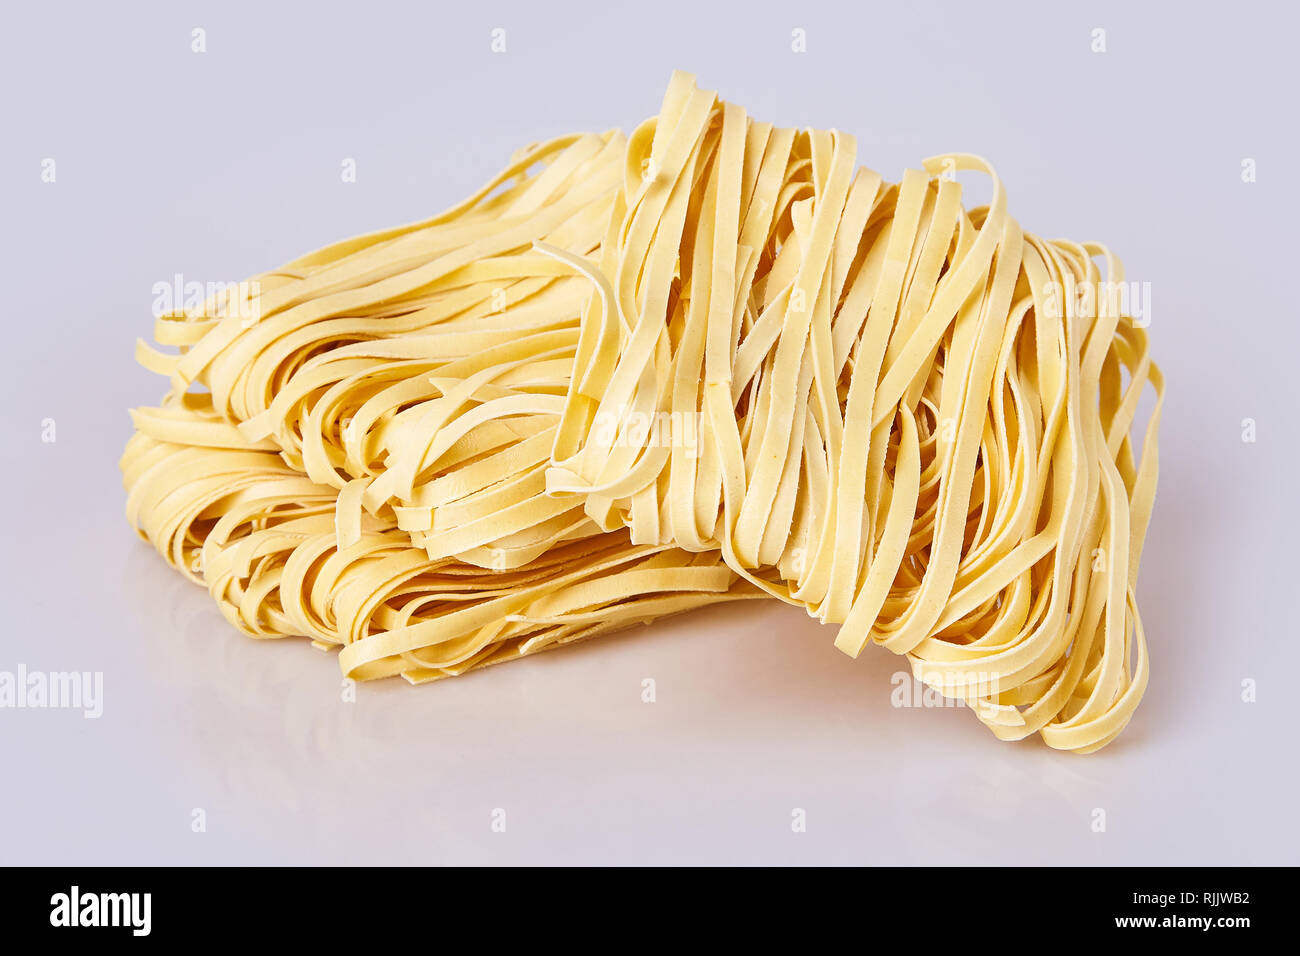 Dry thick rolled noodles square shape. Capelli d'angelo, Angel's hair - pasta.  Homemade italian pasta tagliatelle. Italian Cuisine. Egg noodles. Stock Photo